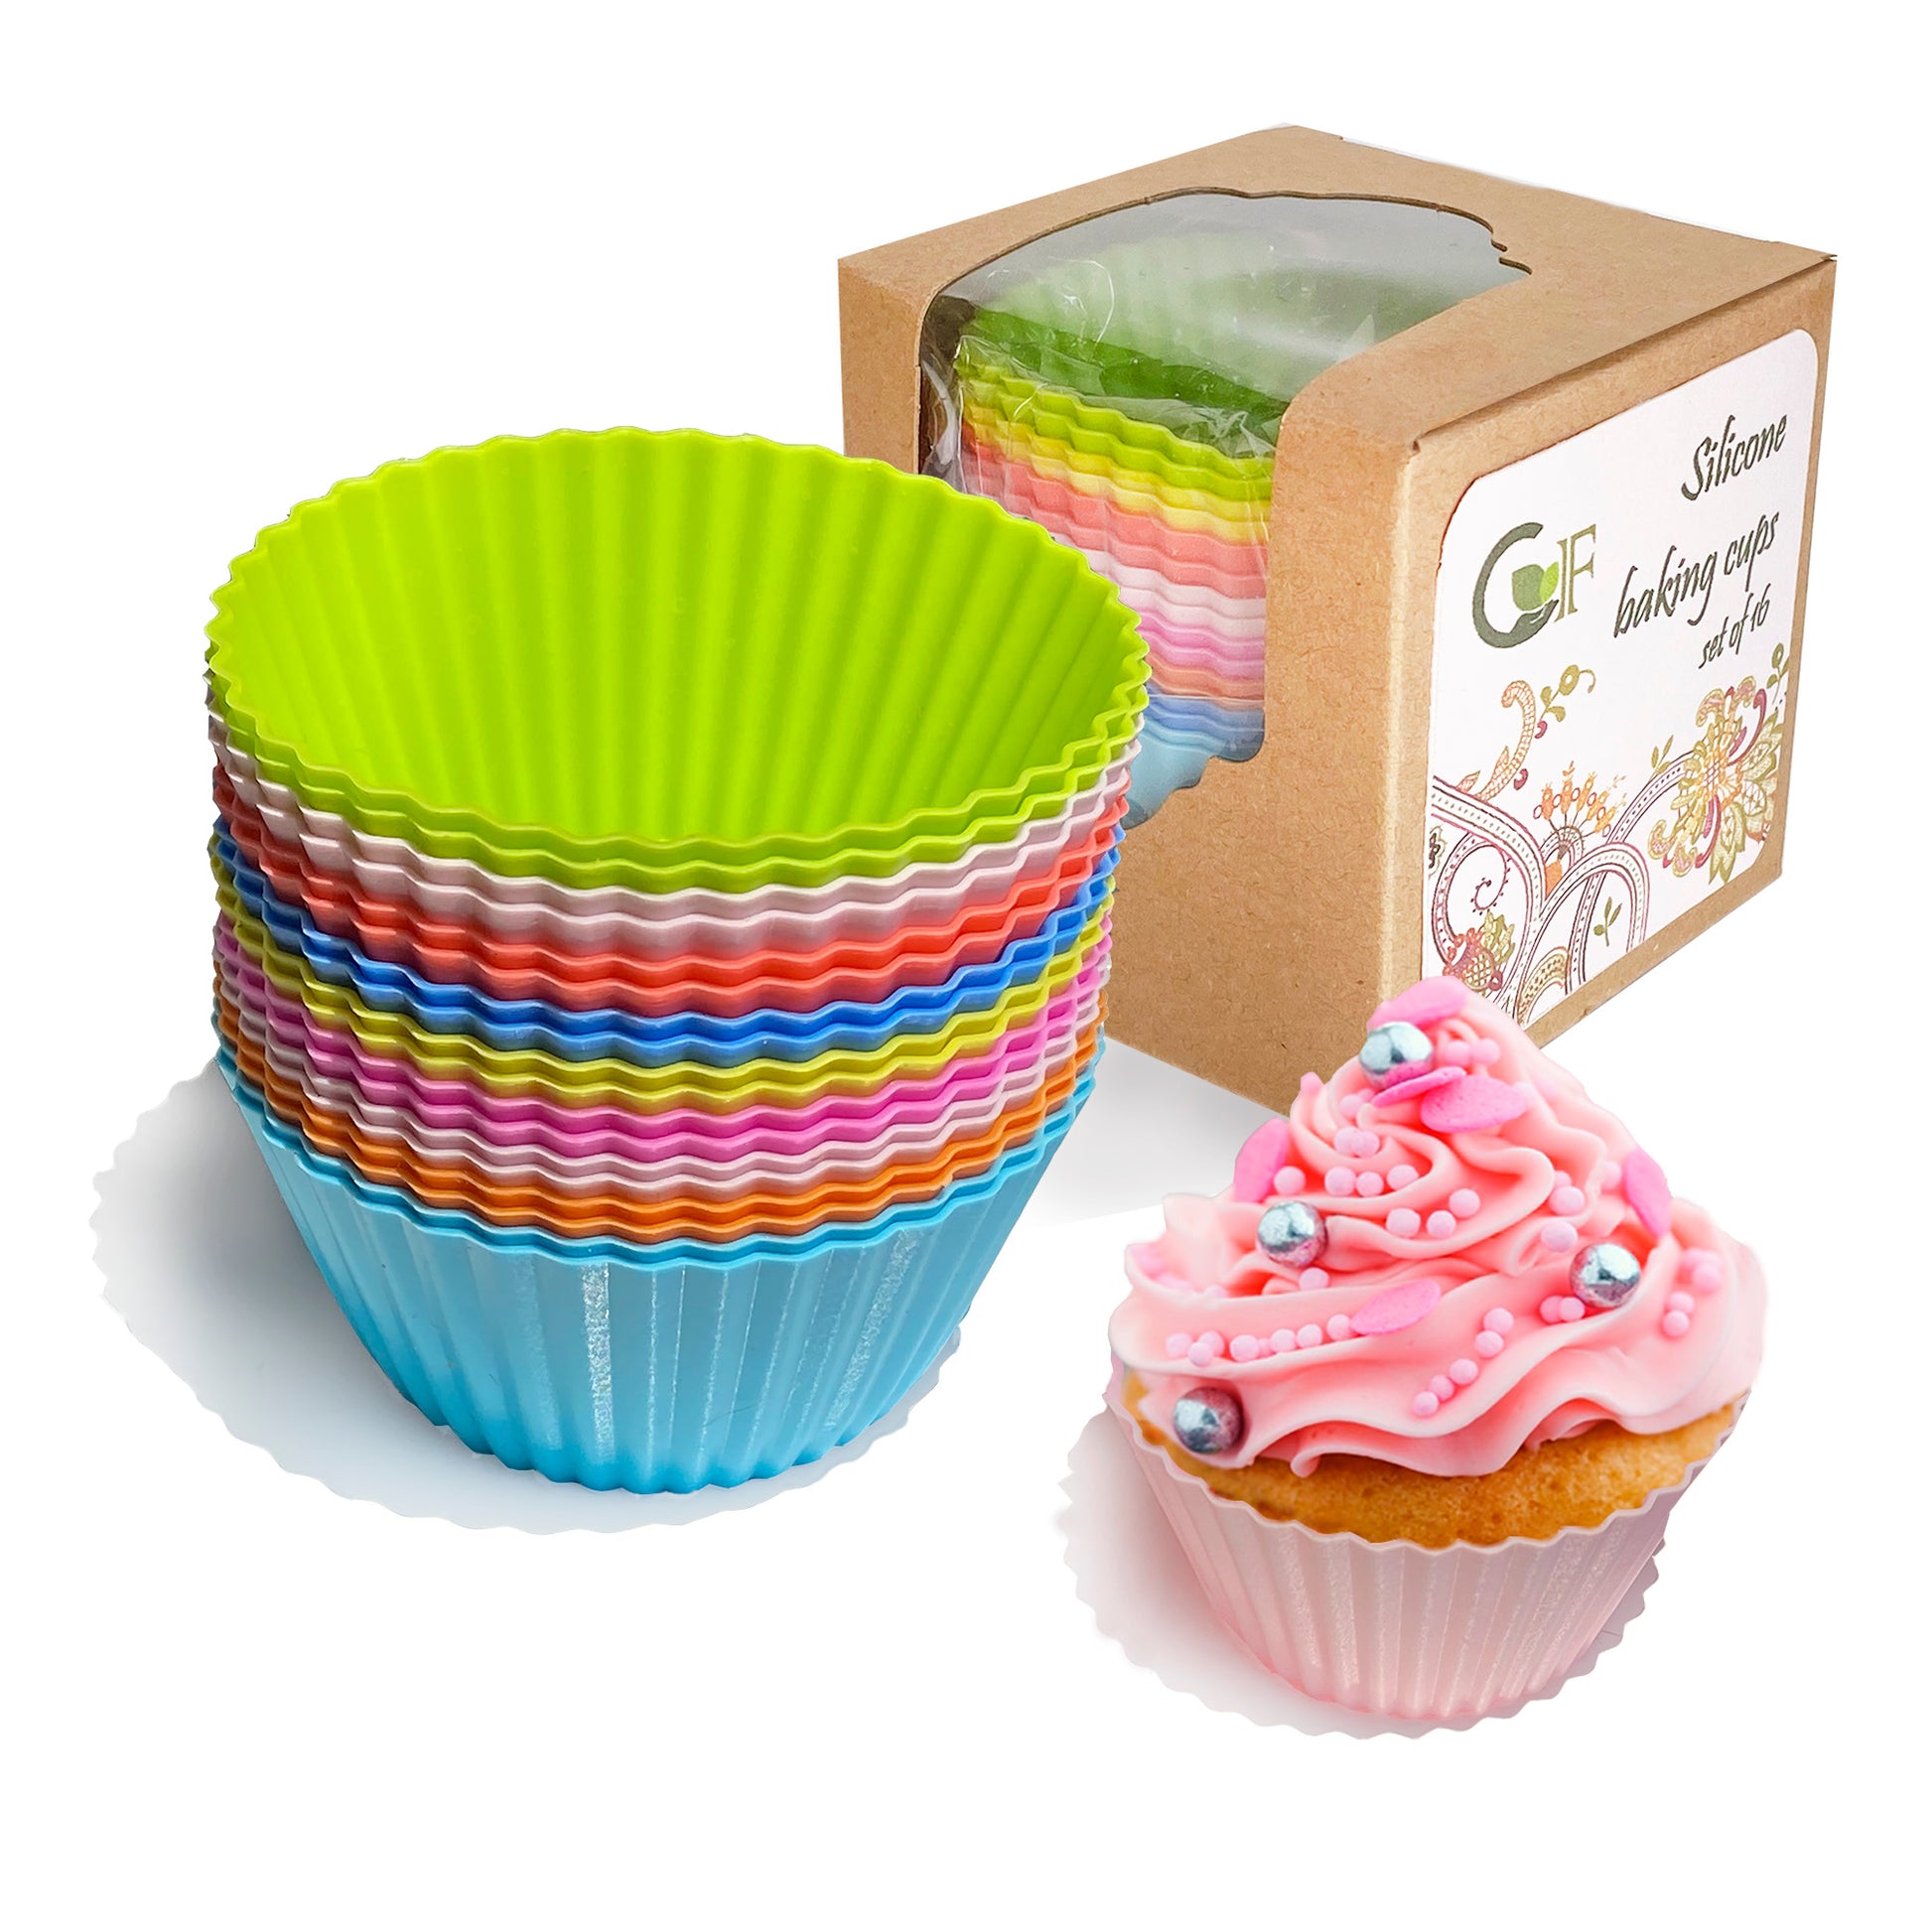 Silicone Cupcake Baking Cups Heavy Duty Silicone Baking Cups